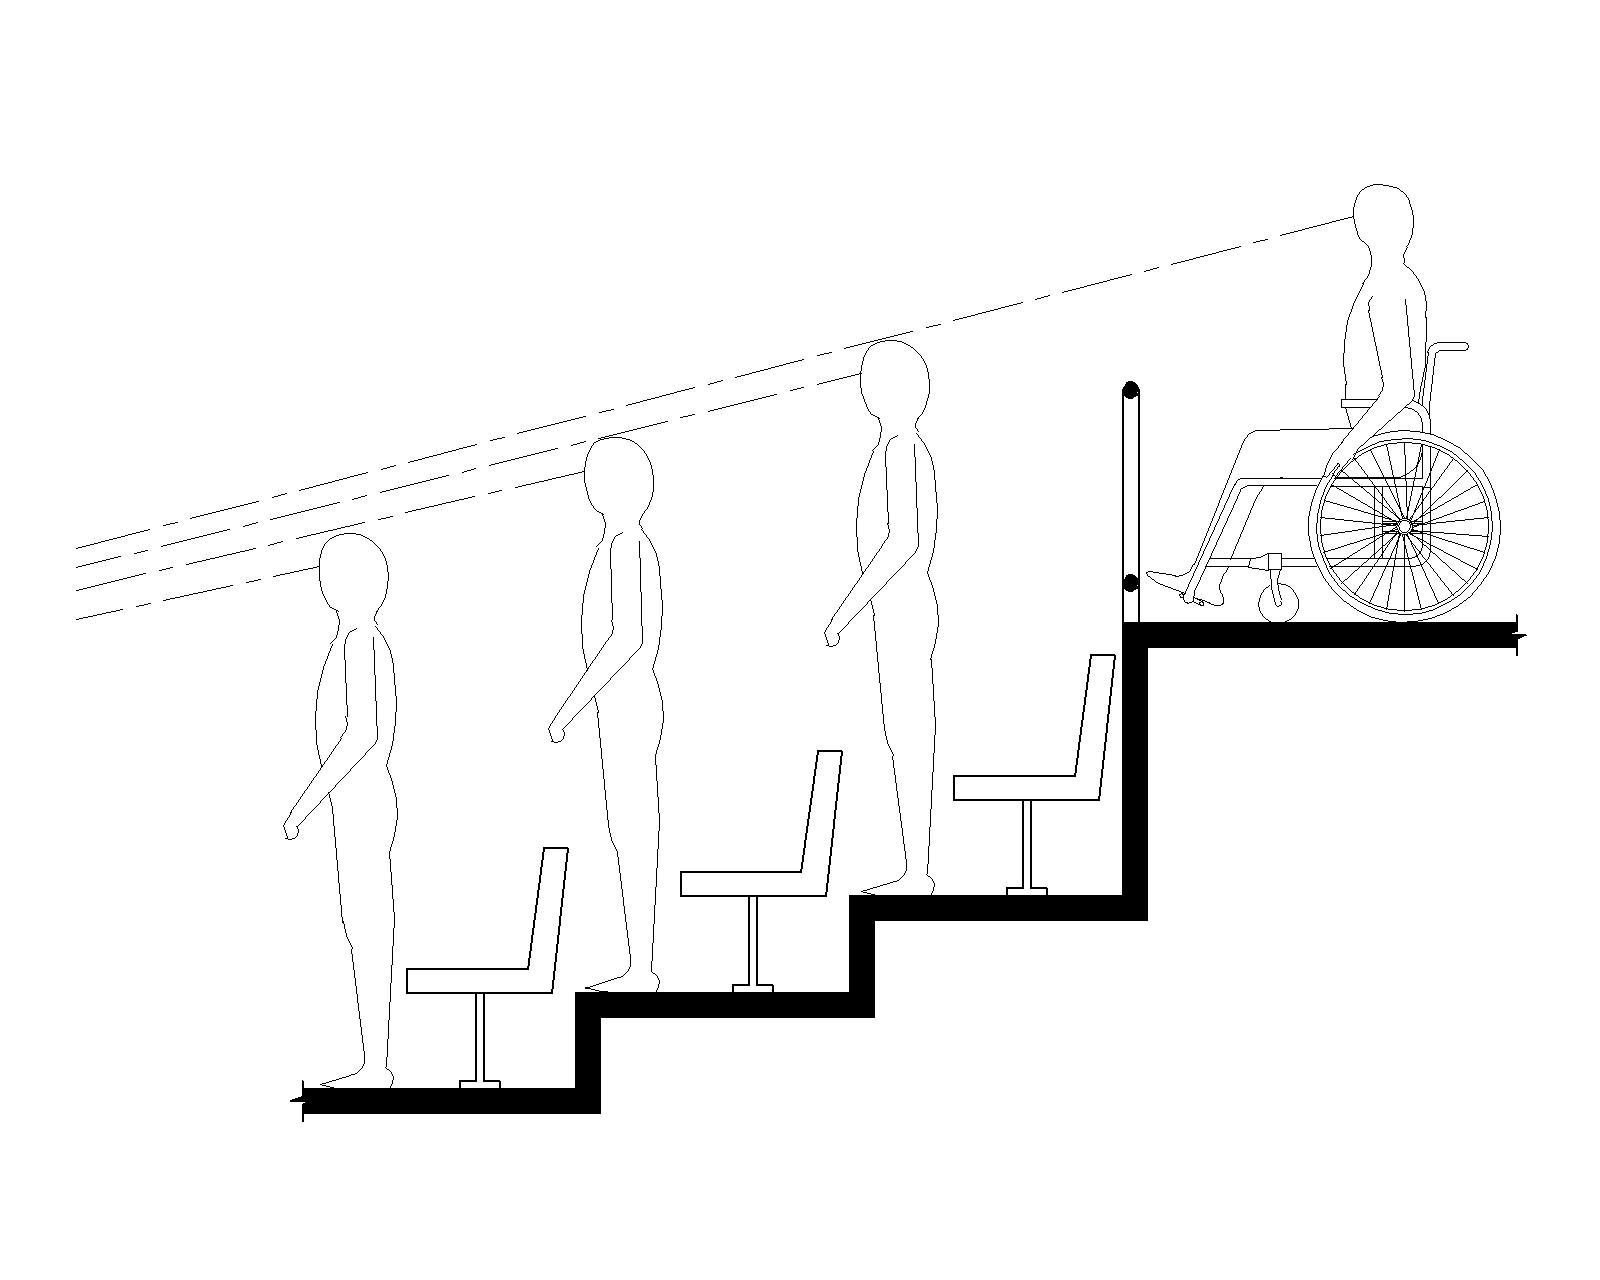 Elevation drawing shows a person using a wheelchair on an upper level of tiered seating elevated sufficiently to have a line of sight over the heads of spectators standing in front.